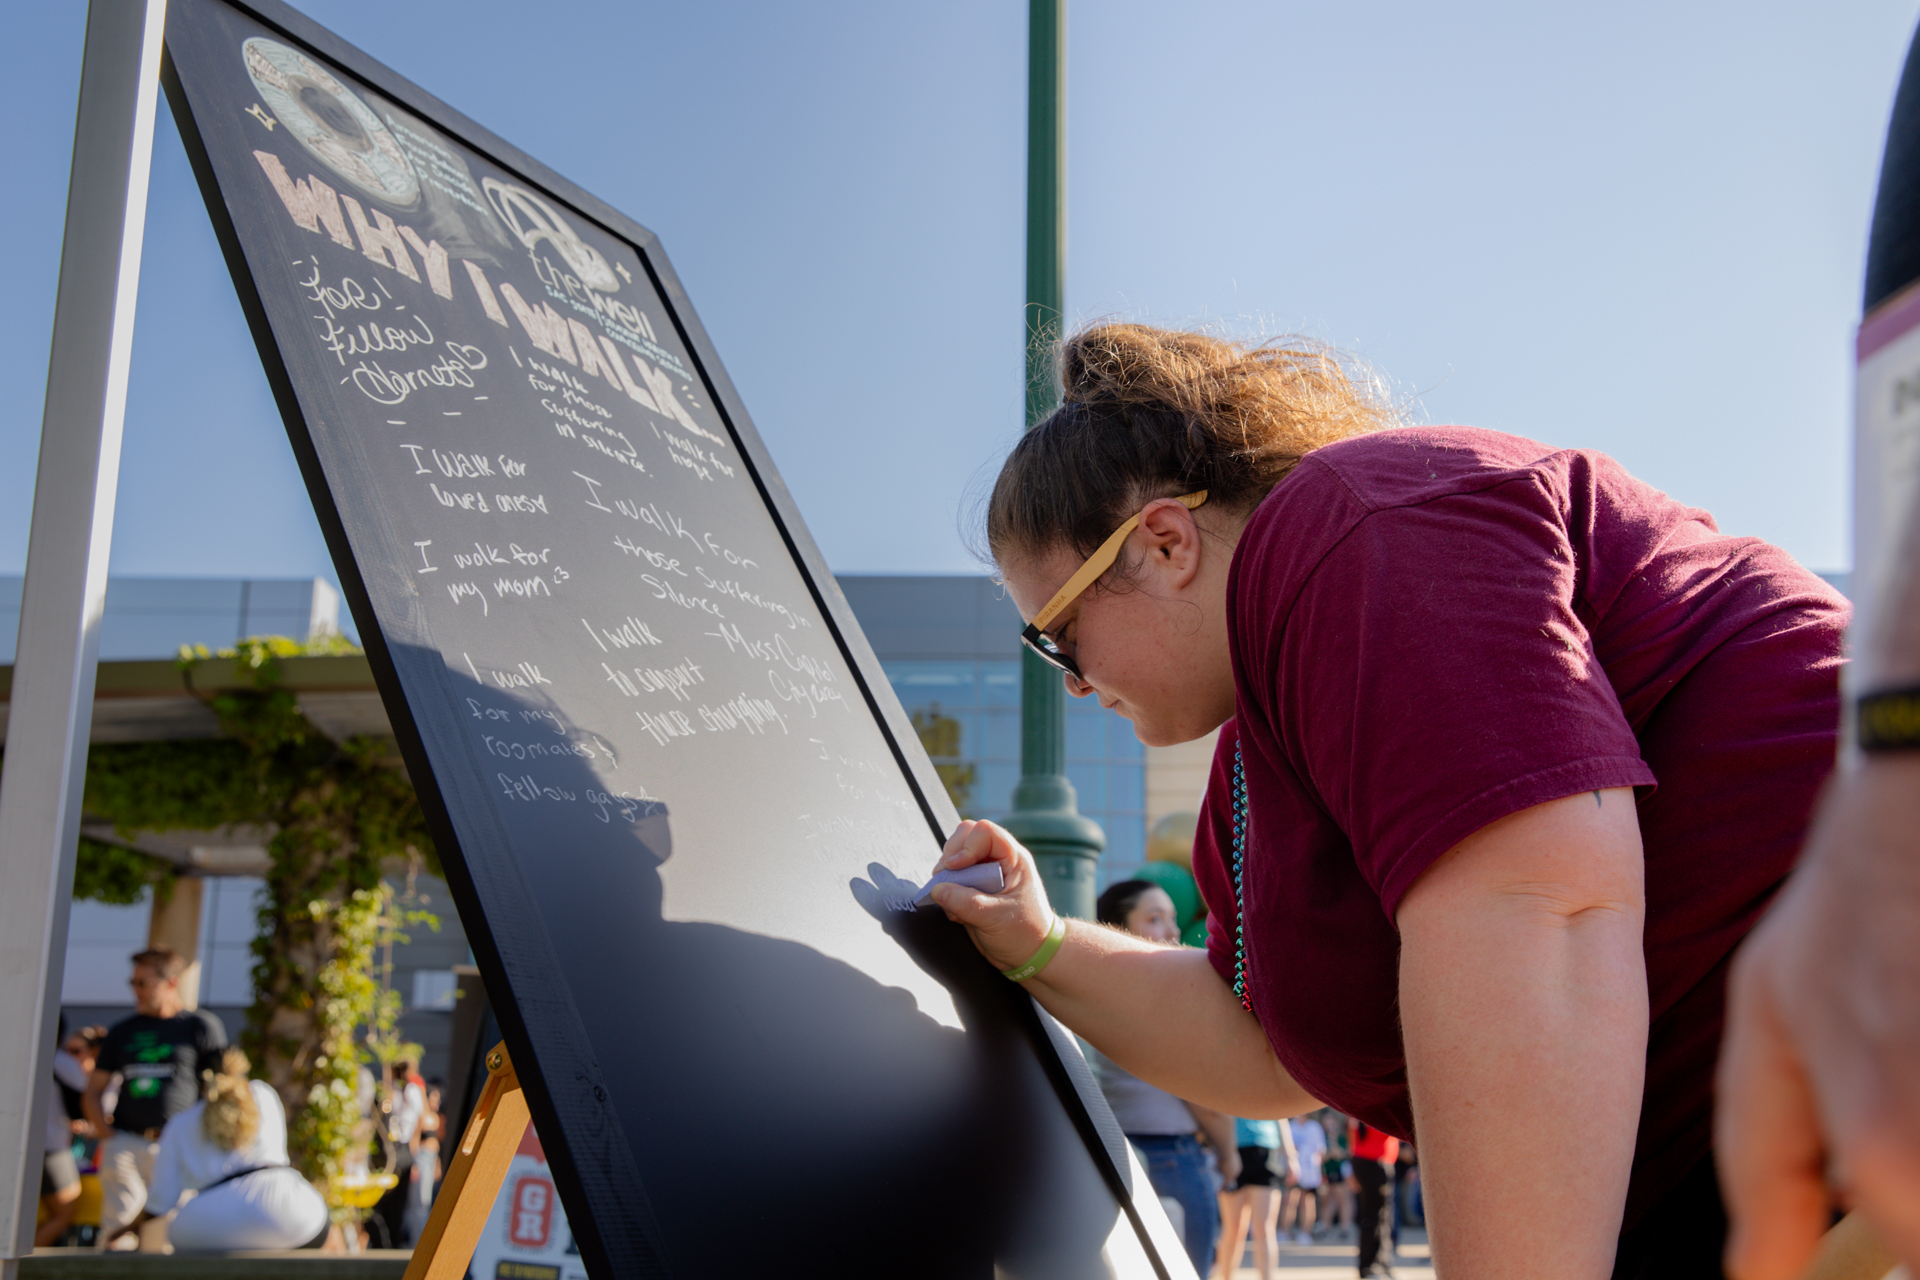 An Out of the Darkness participant writes a message on a chalkboard.